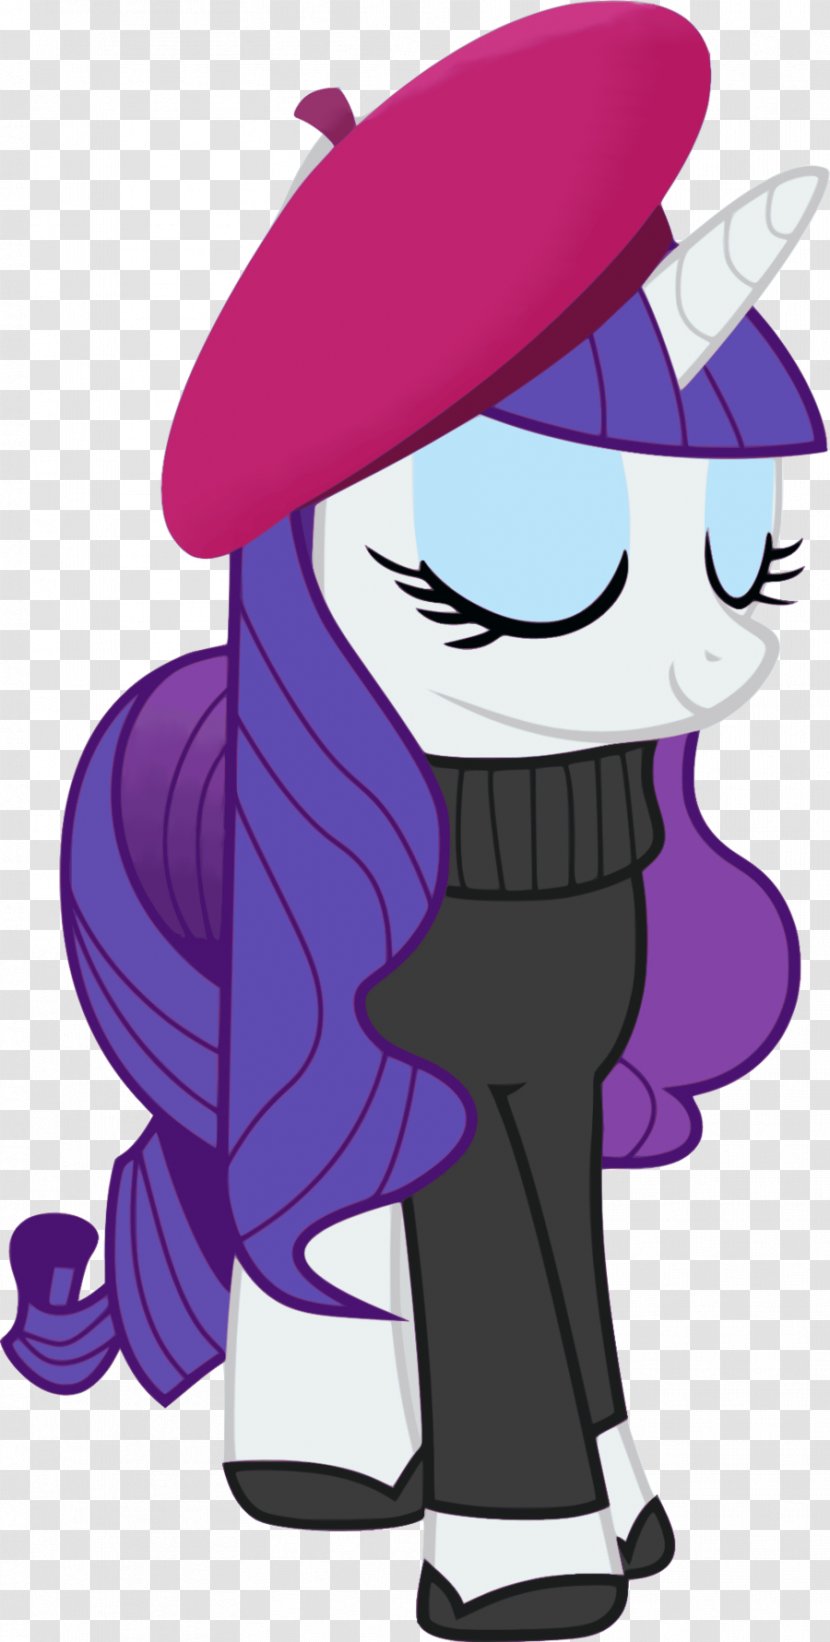 Rarity Twilight Sparkle Rainbow Dash Pony Dress - Pinkie Pie - Knocked Over The Particles Transparent PNG